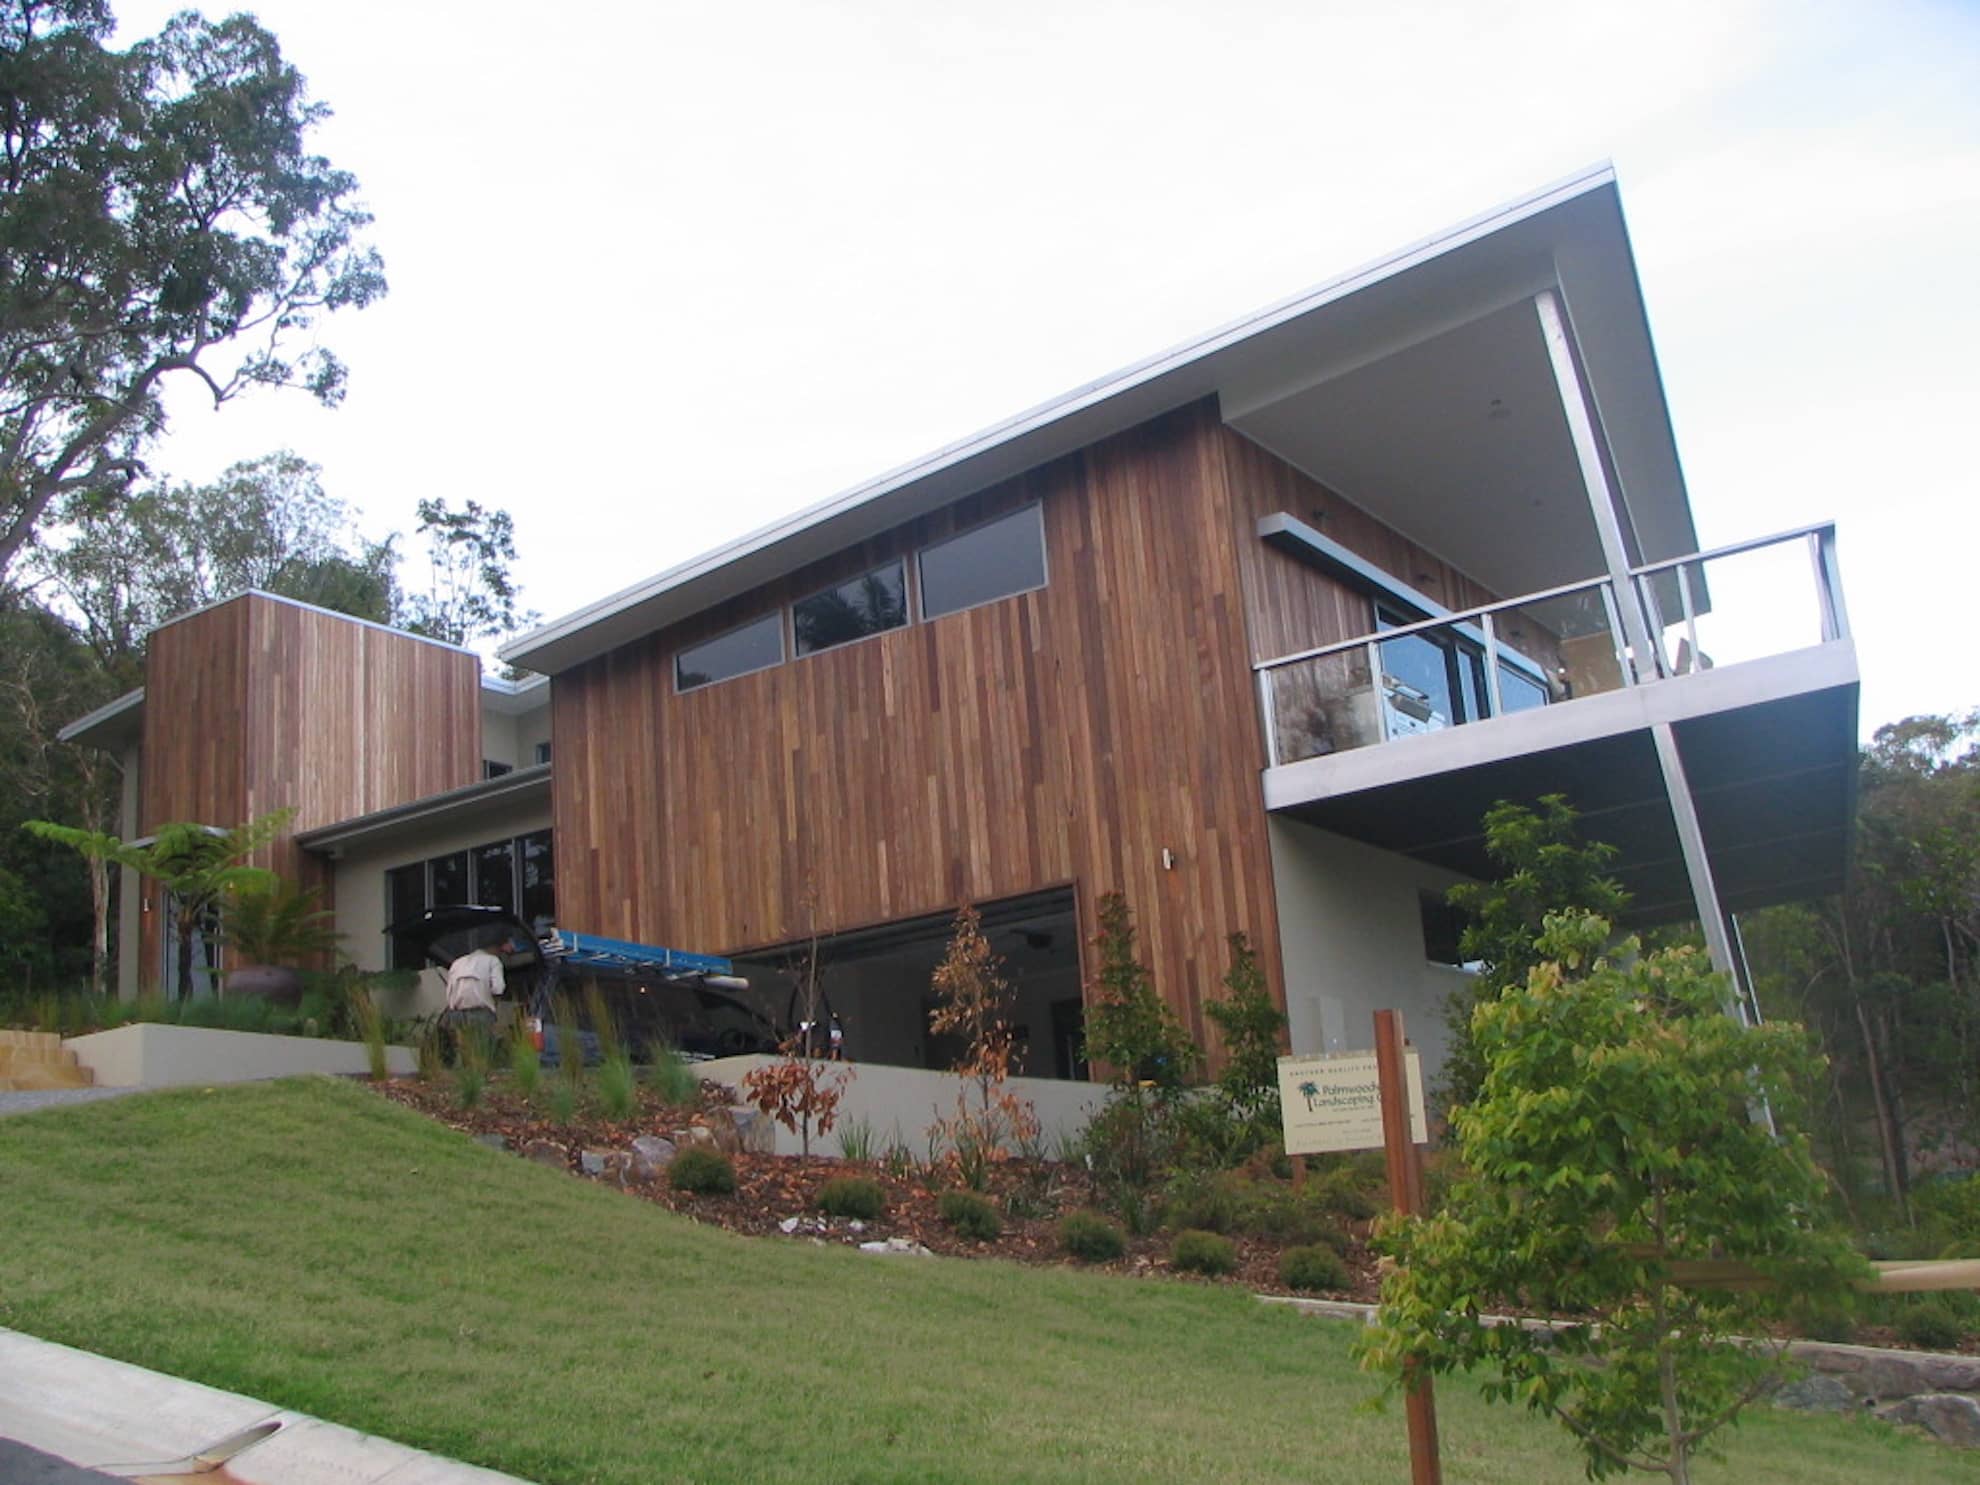 Birdhaven Close project by mdesign, a building design practice that operates on the Sunshine Coast.